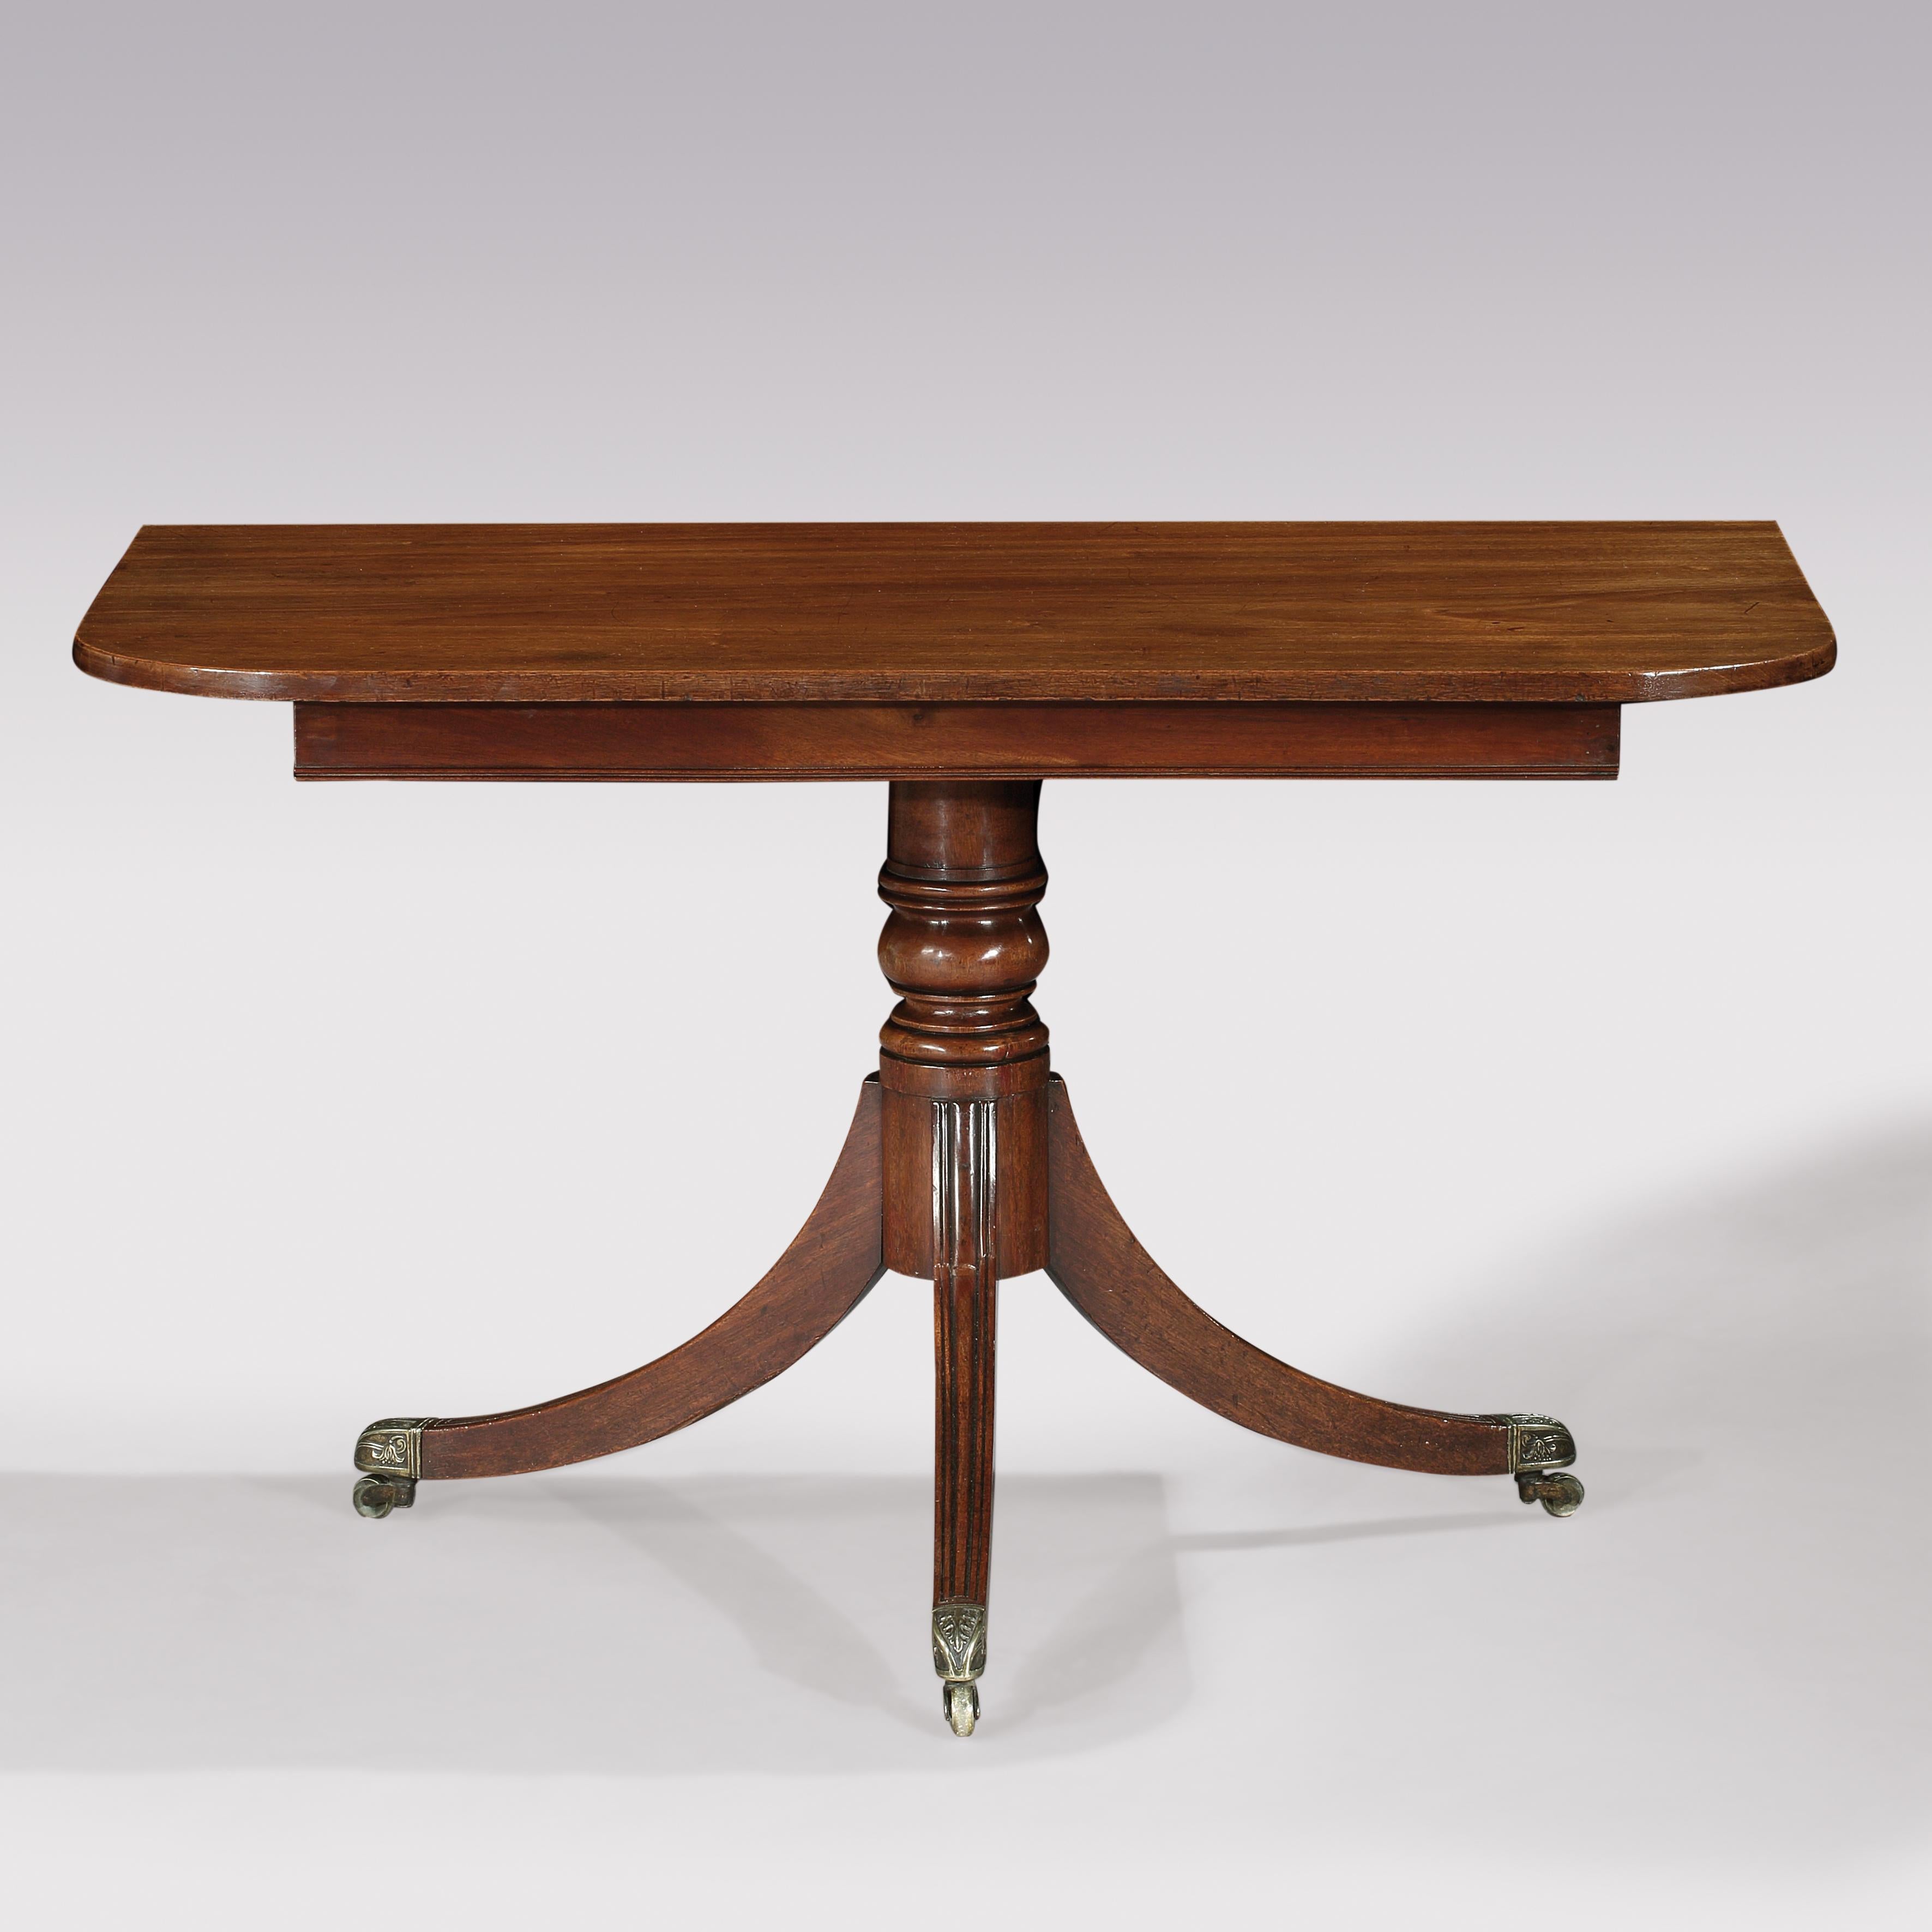 An early 19th century Regency Period well figured mahogany two pedestal dining table, having rectangular ends with rounded corners fitted with 1 original and 1 matching leaf, supported on ring turned baluster stems, ending on three splay moulded